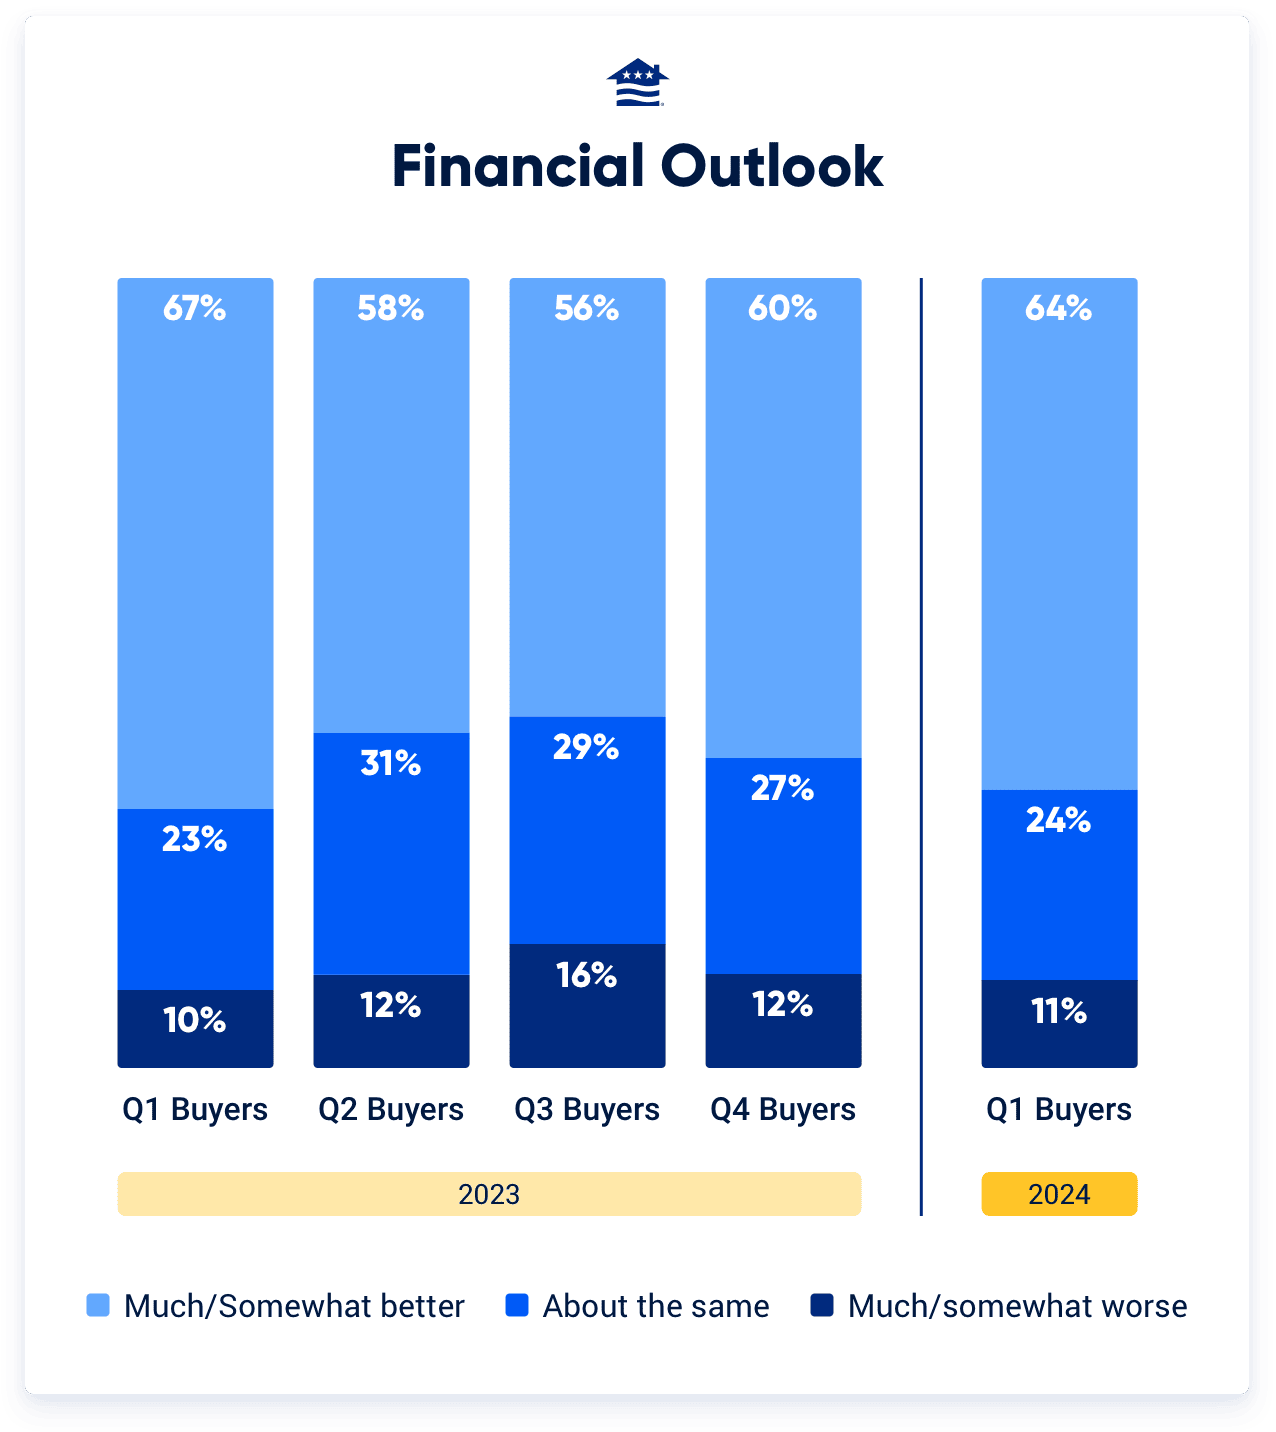 Nearly two-thirds (64%) of Veterans and military members expect to be better off financially over the next year, up eight points from the third quarter and nearly returning to optimism levels not seen since the first quarter of 2023.